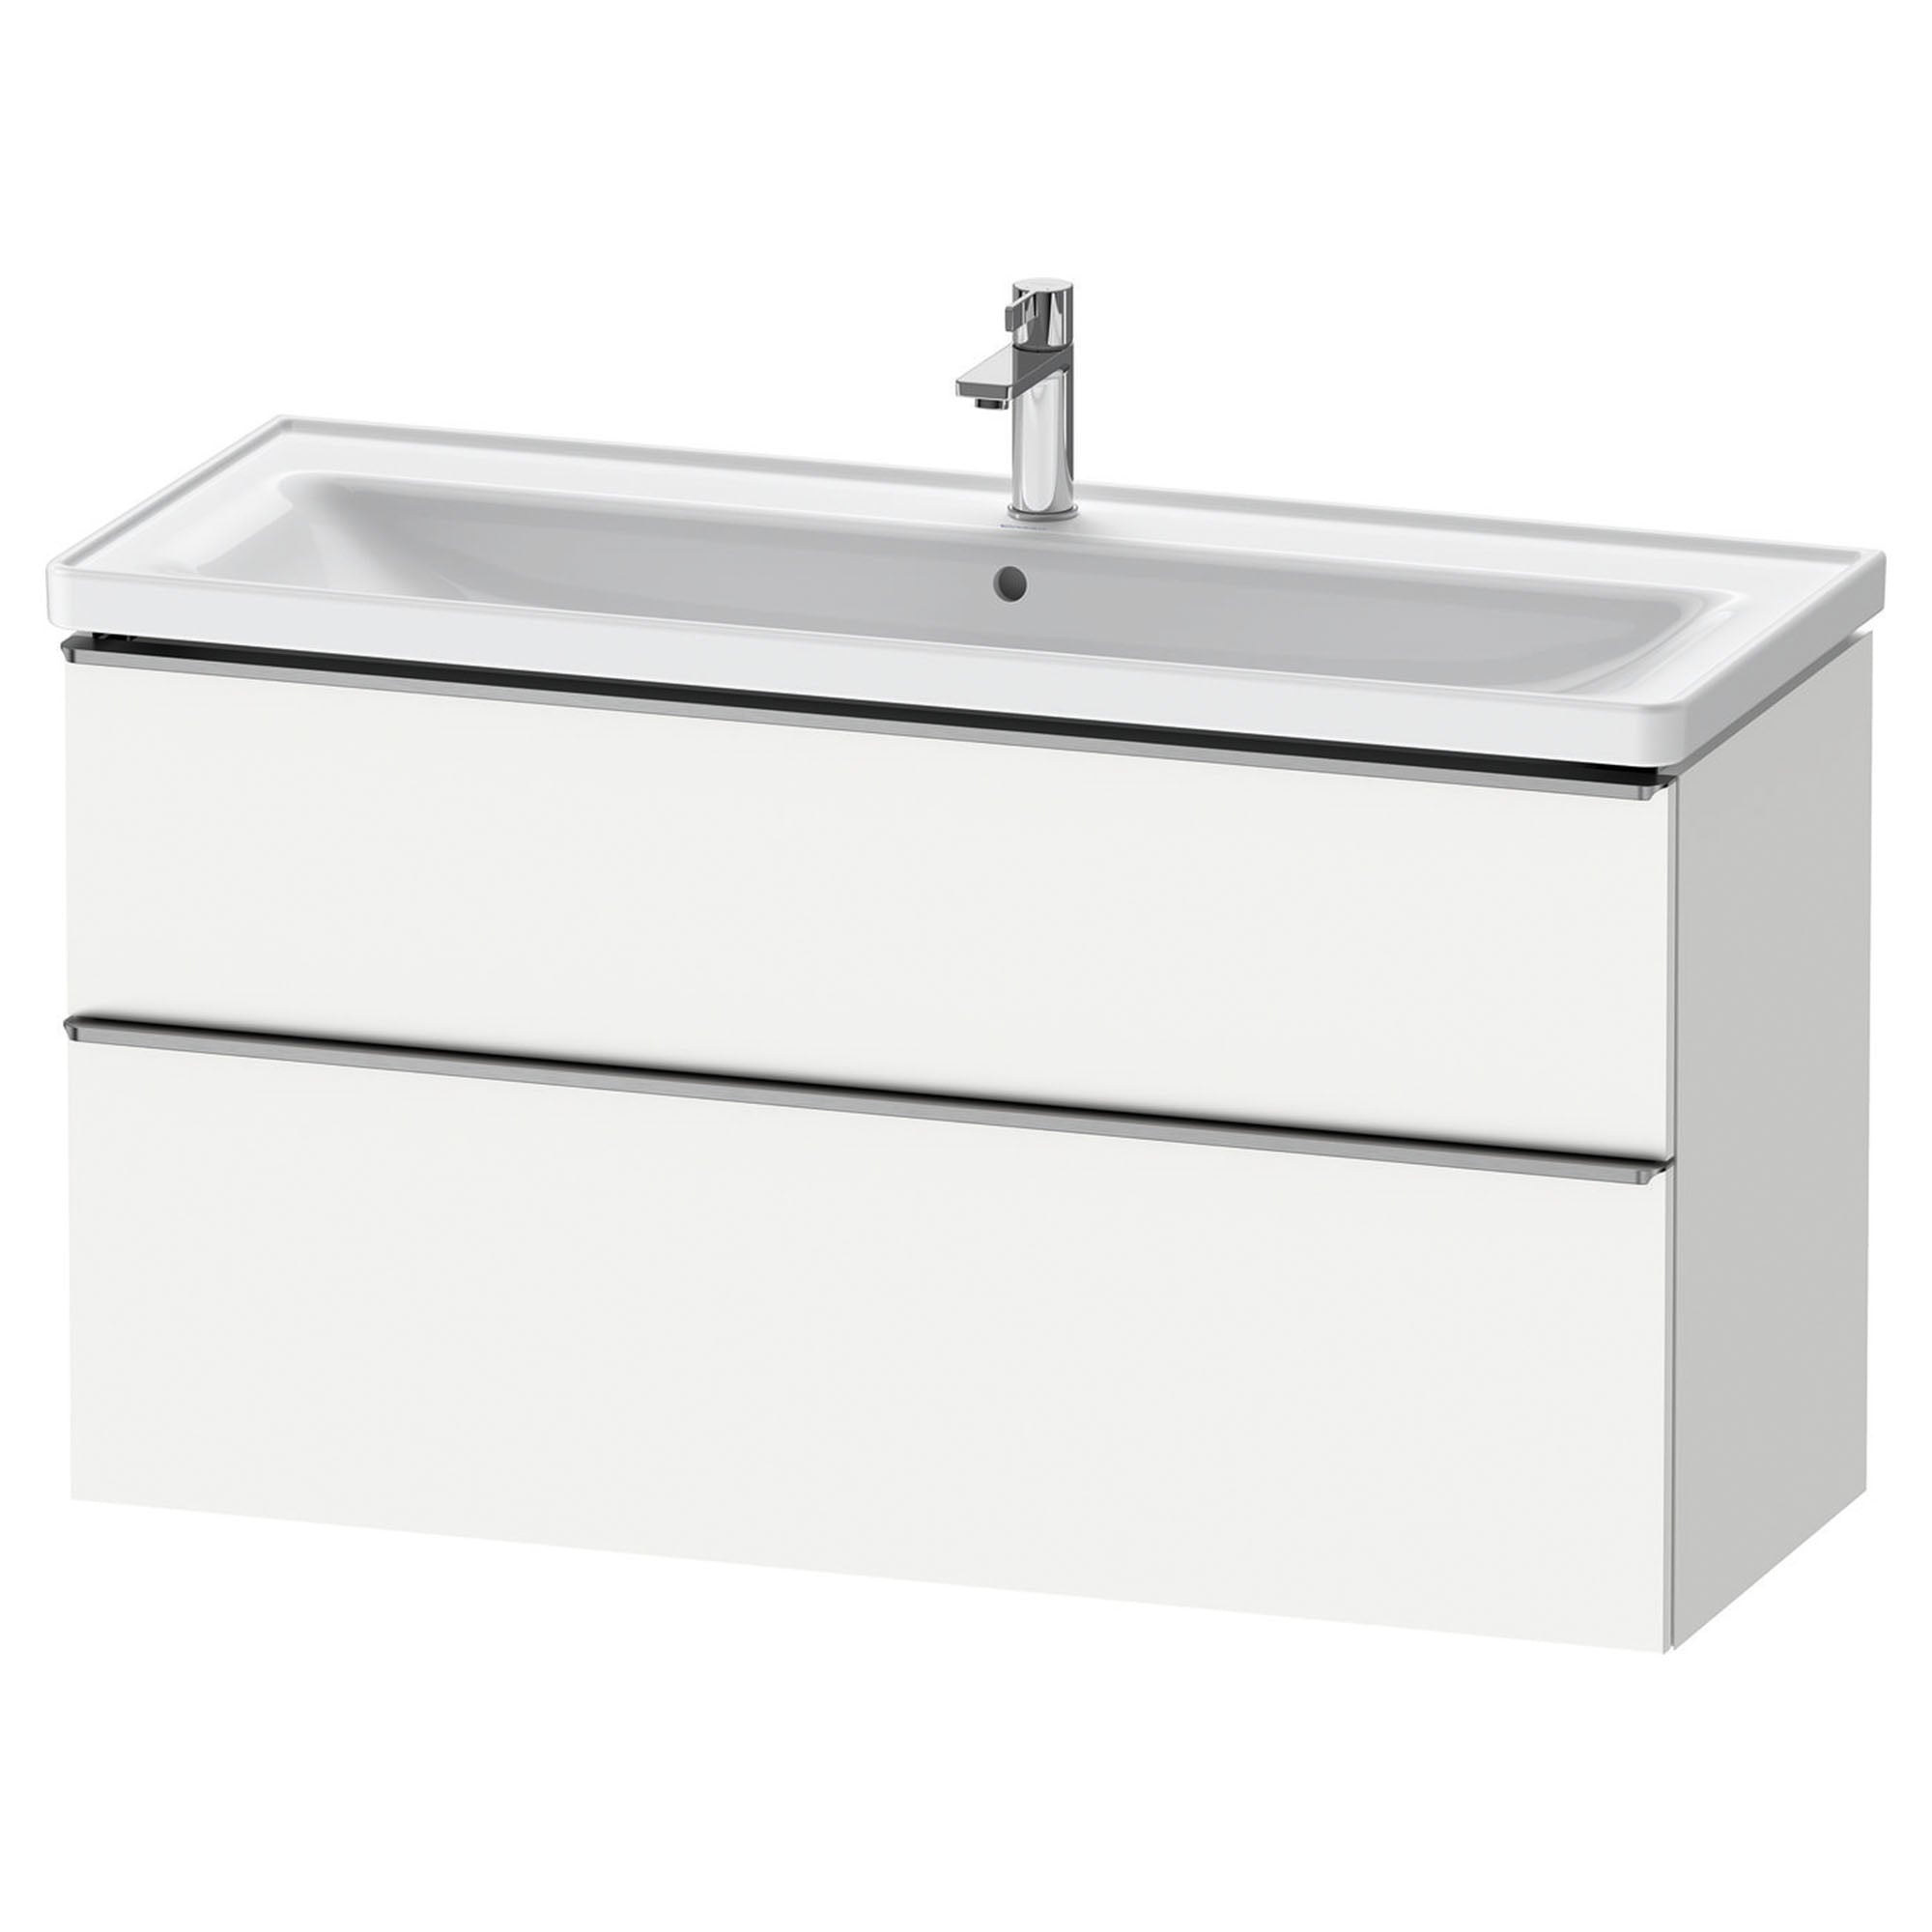 duravit d-neo 1200mm wall mounted vanity unit with d-neo basin matt white stainless steel handles